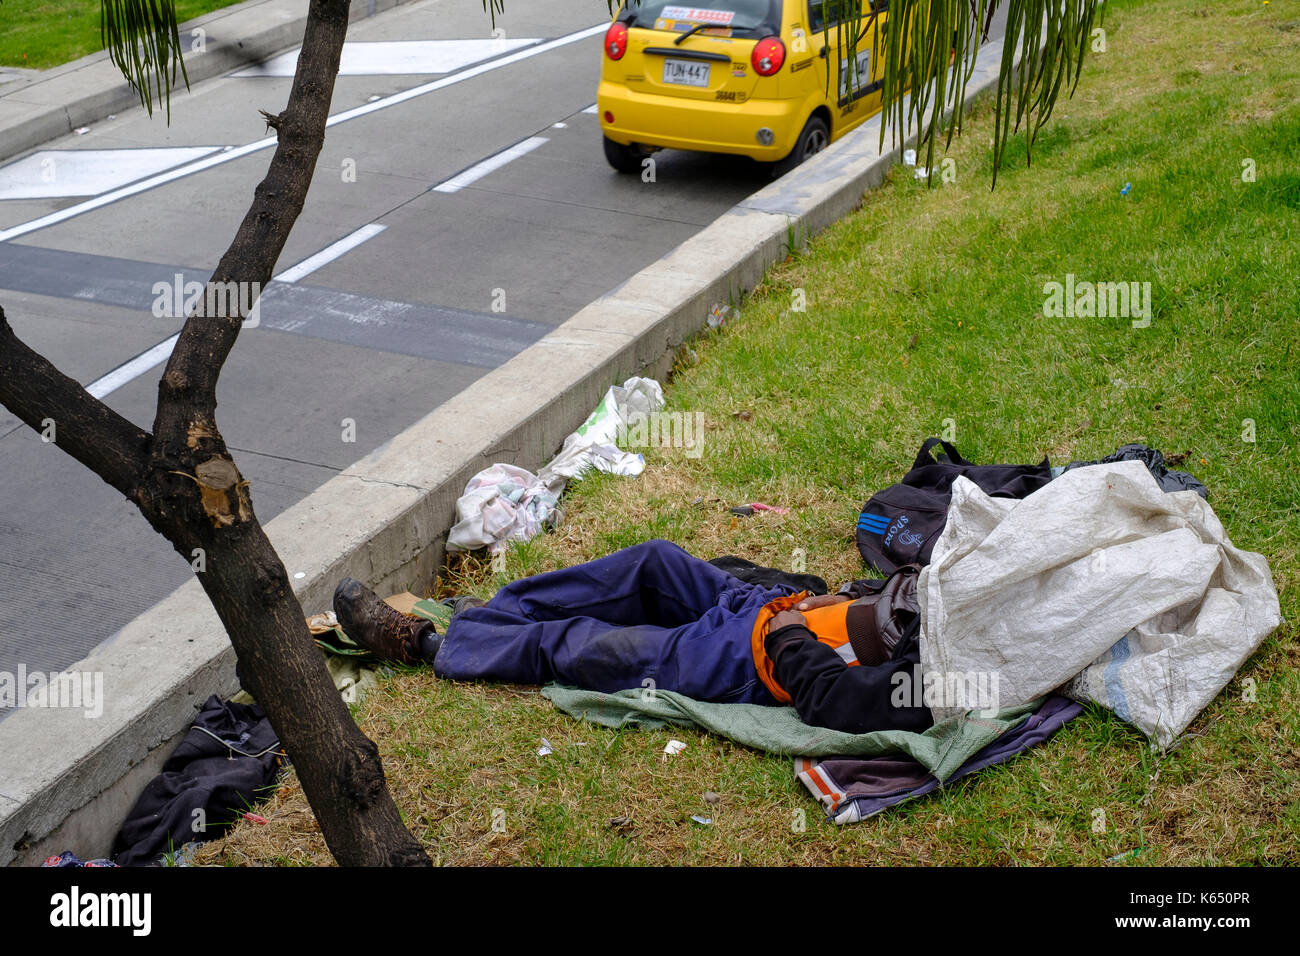 Colombia: Bogota. Homeless person sleeping on a lawn in the city centre, along a boulevard Stock Photo